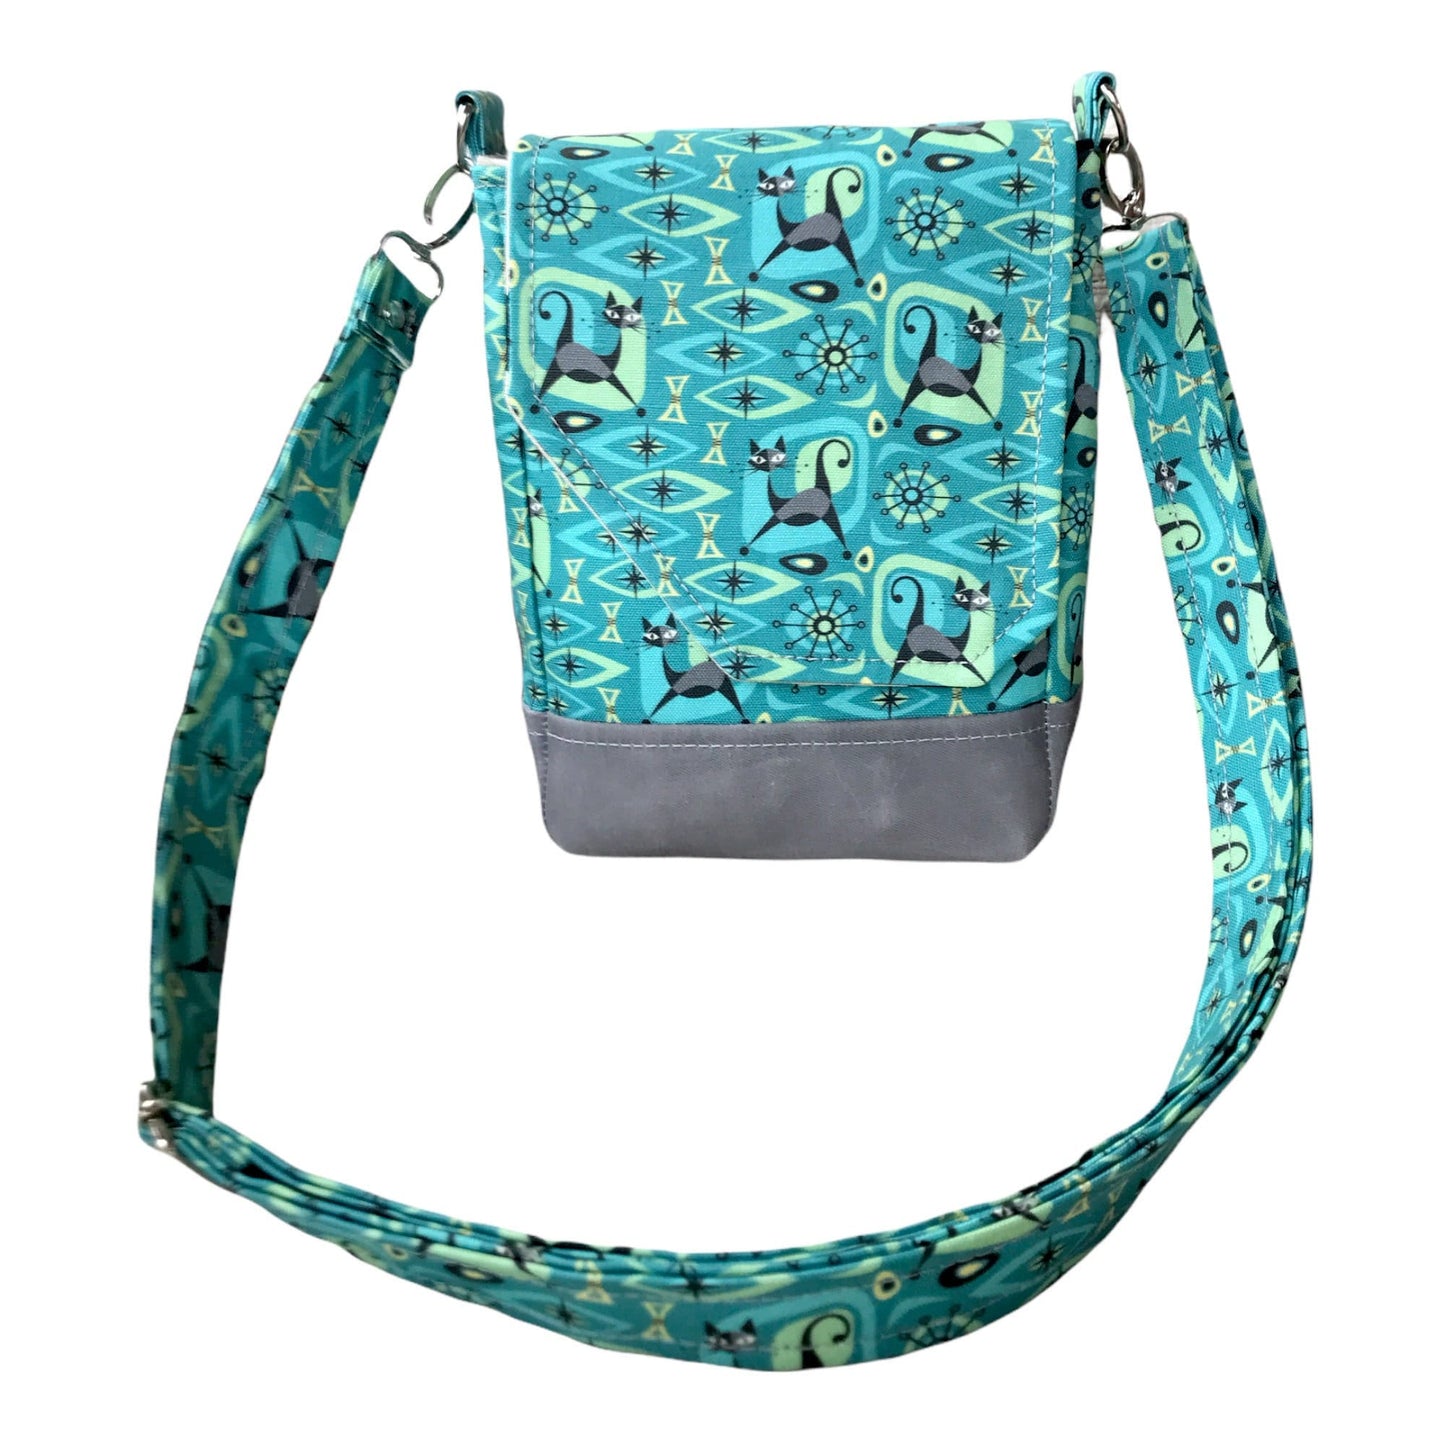 Cat print purse featuring midcentury atomic design with magnetic closure, two pockets, and a main compartment. Bag size is 8.5" x 6" x 3".